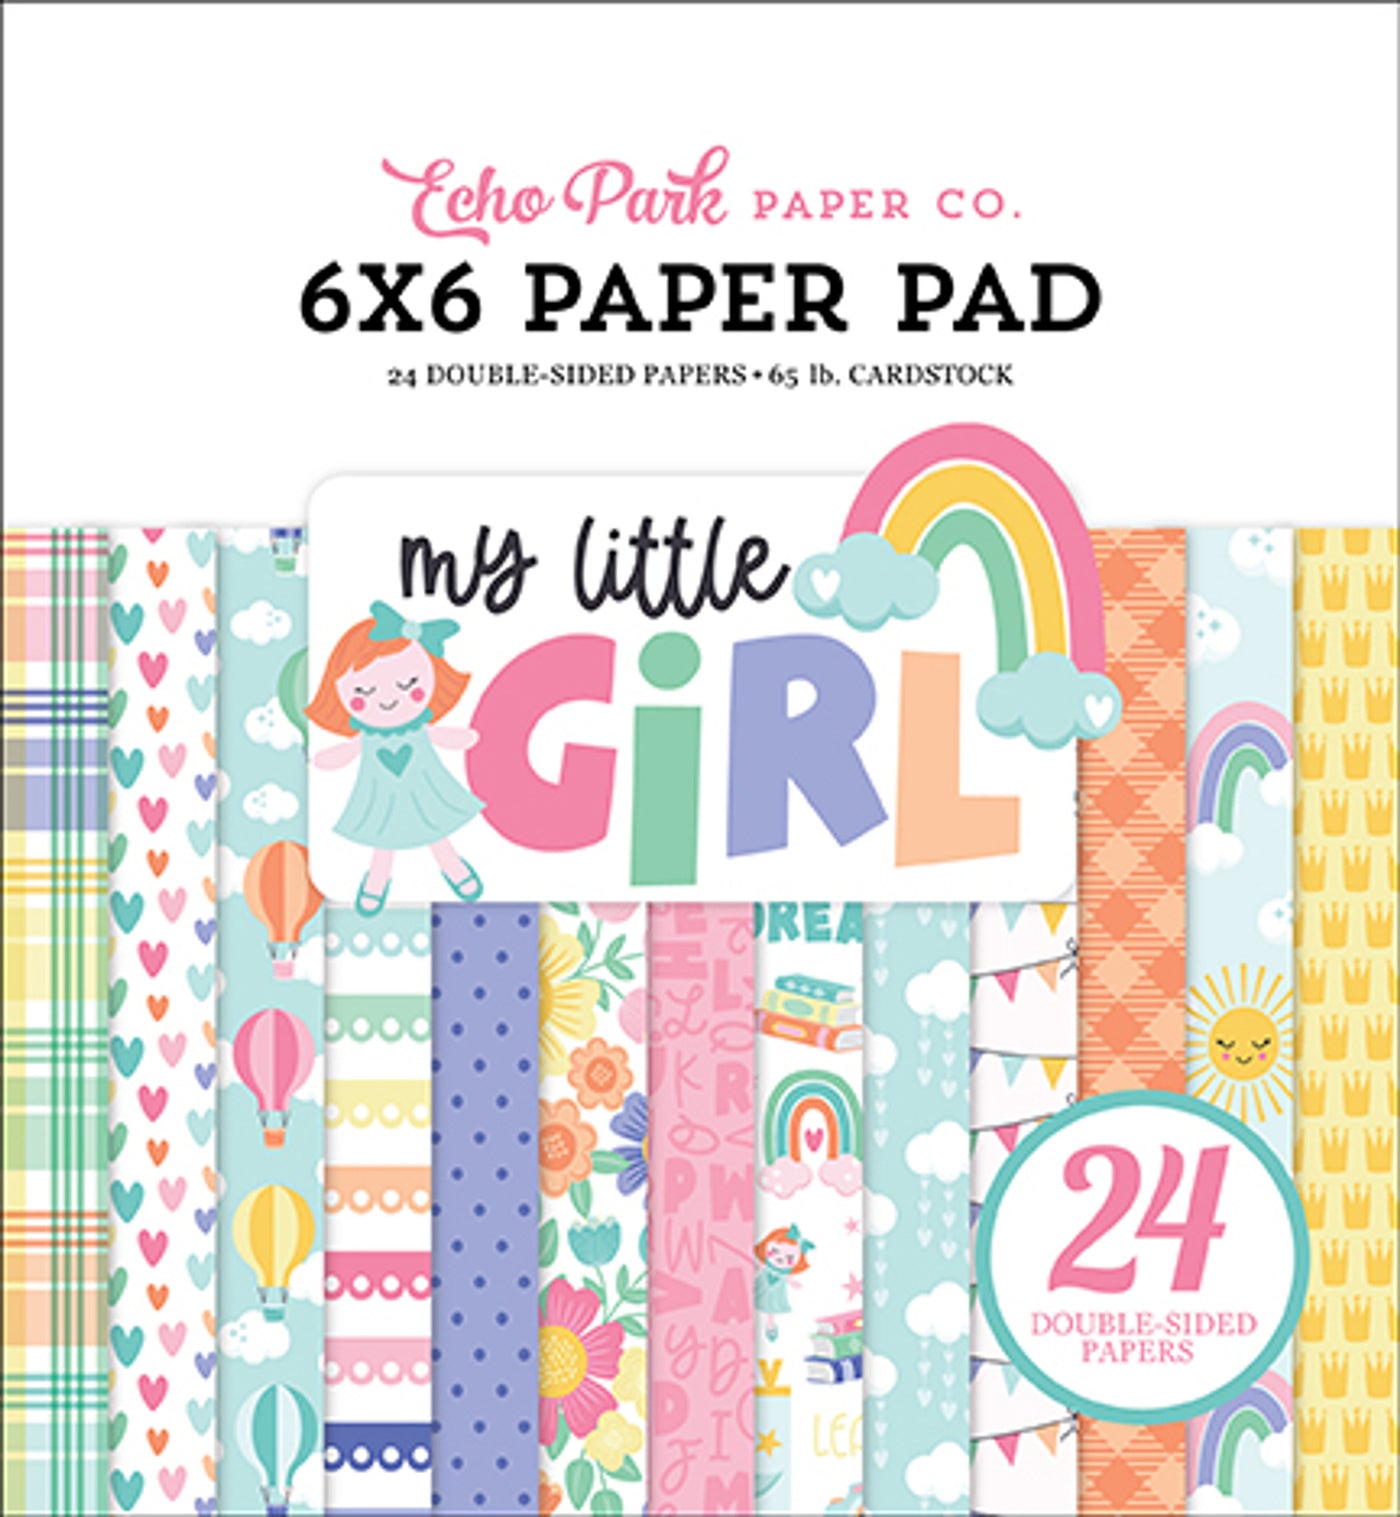 The 6x6 pad features cute designs and colors to celebrate the love for a little girl! Fun for cards and papercrafts. Includes 24 double-sided pages.